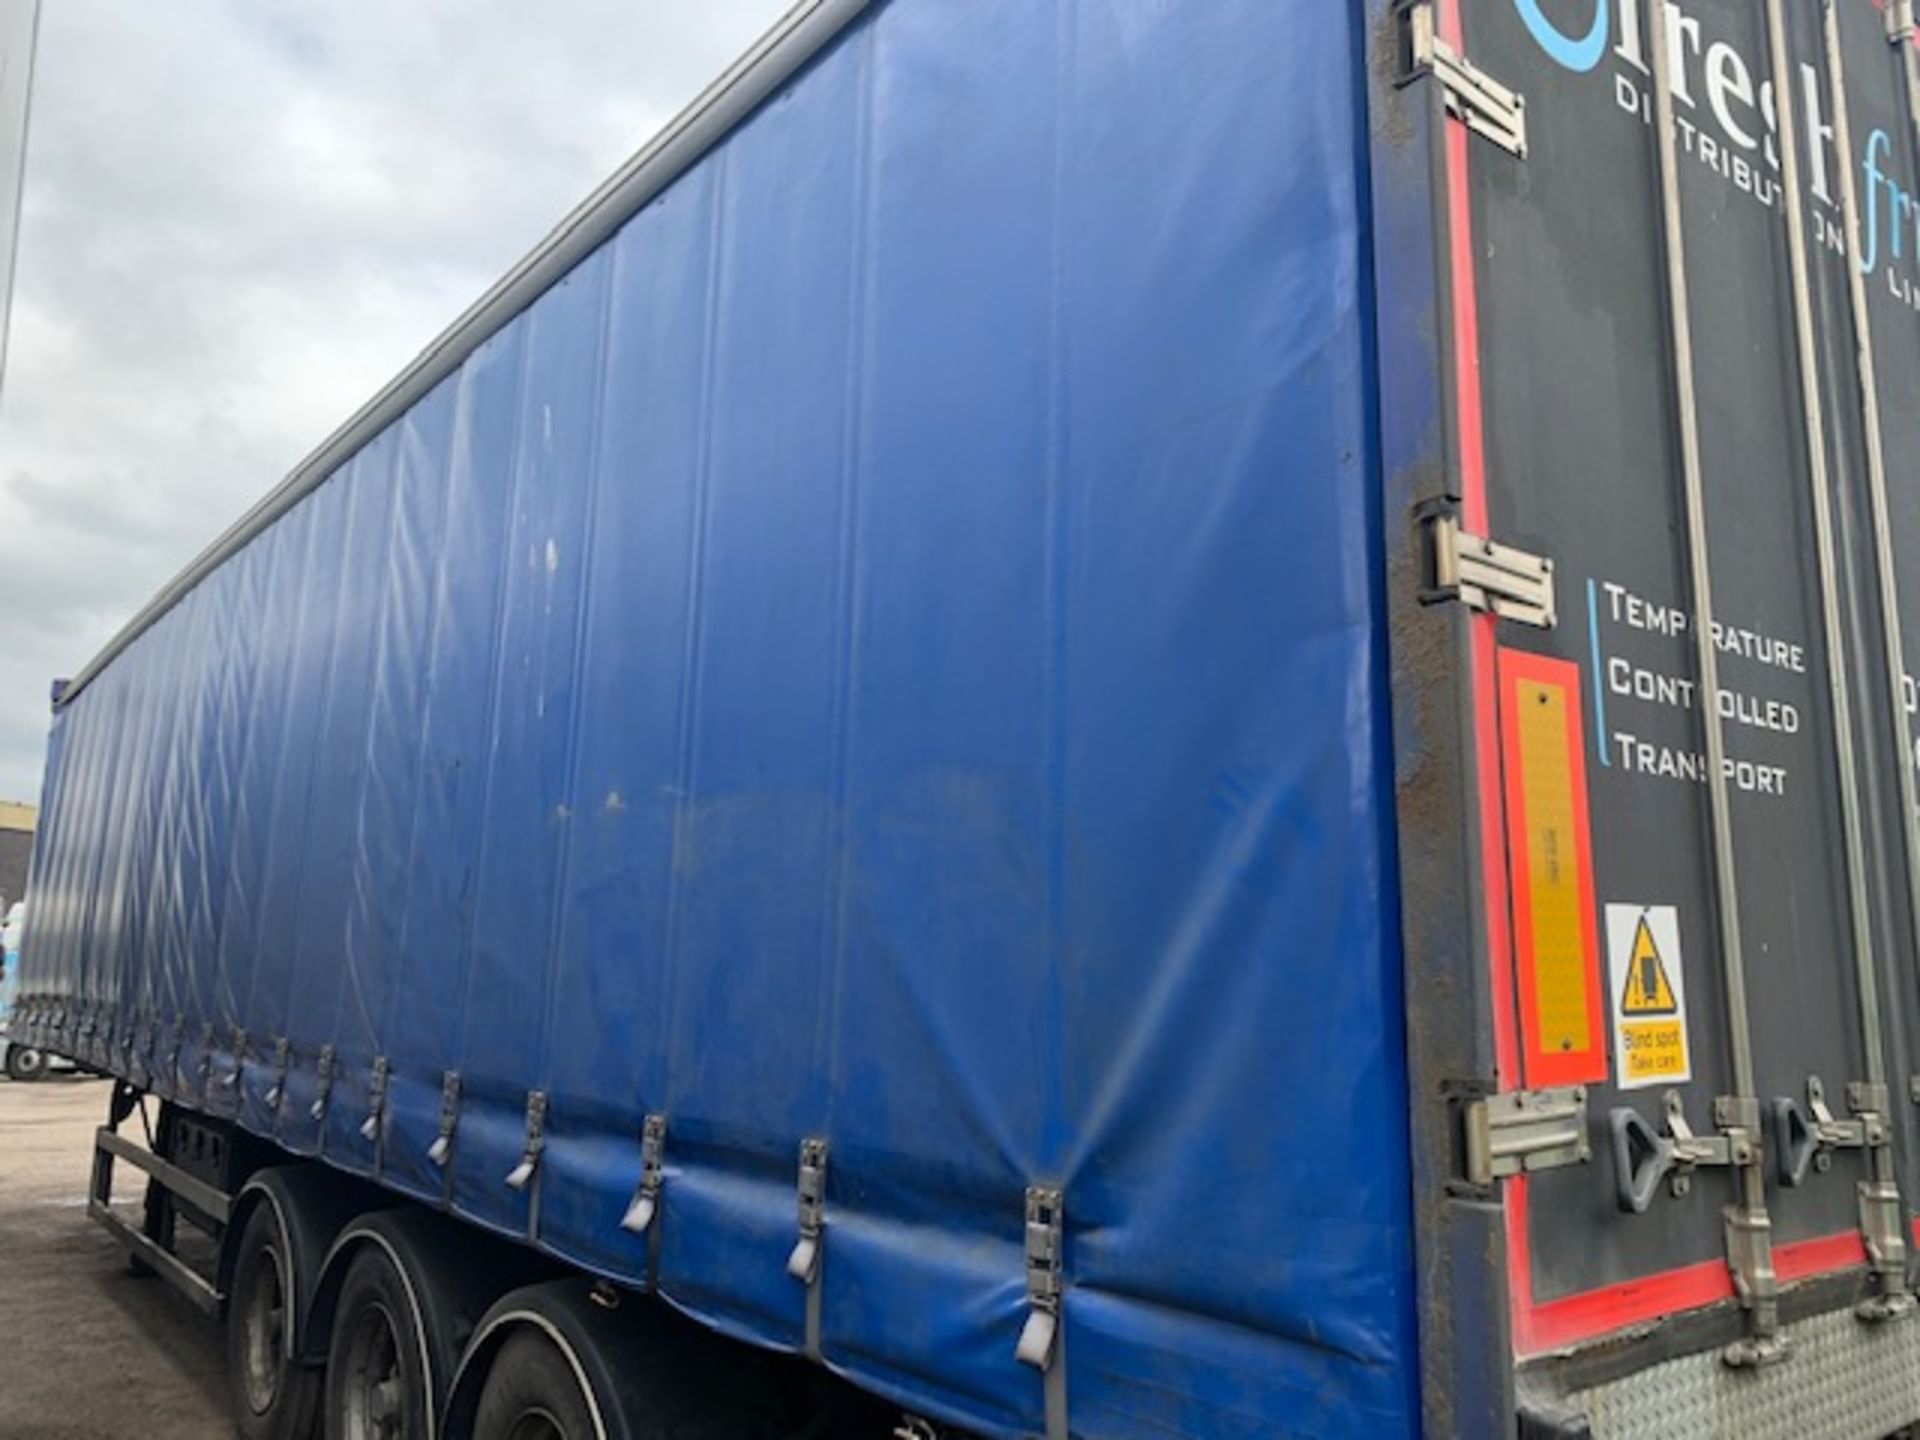 Grays & Adams 14m curtain side triple axle trailer complete with thermo king refrigeration unit - Image 4 of 10